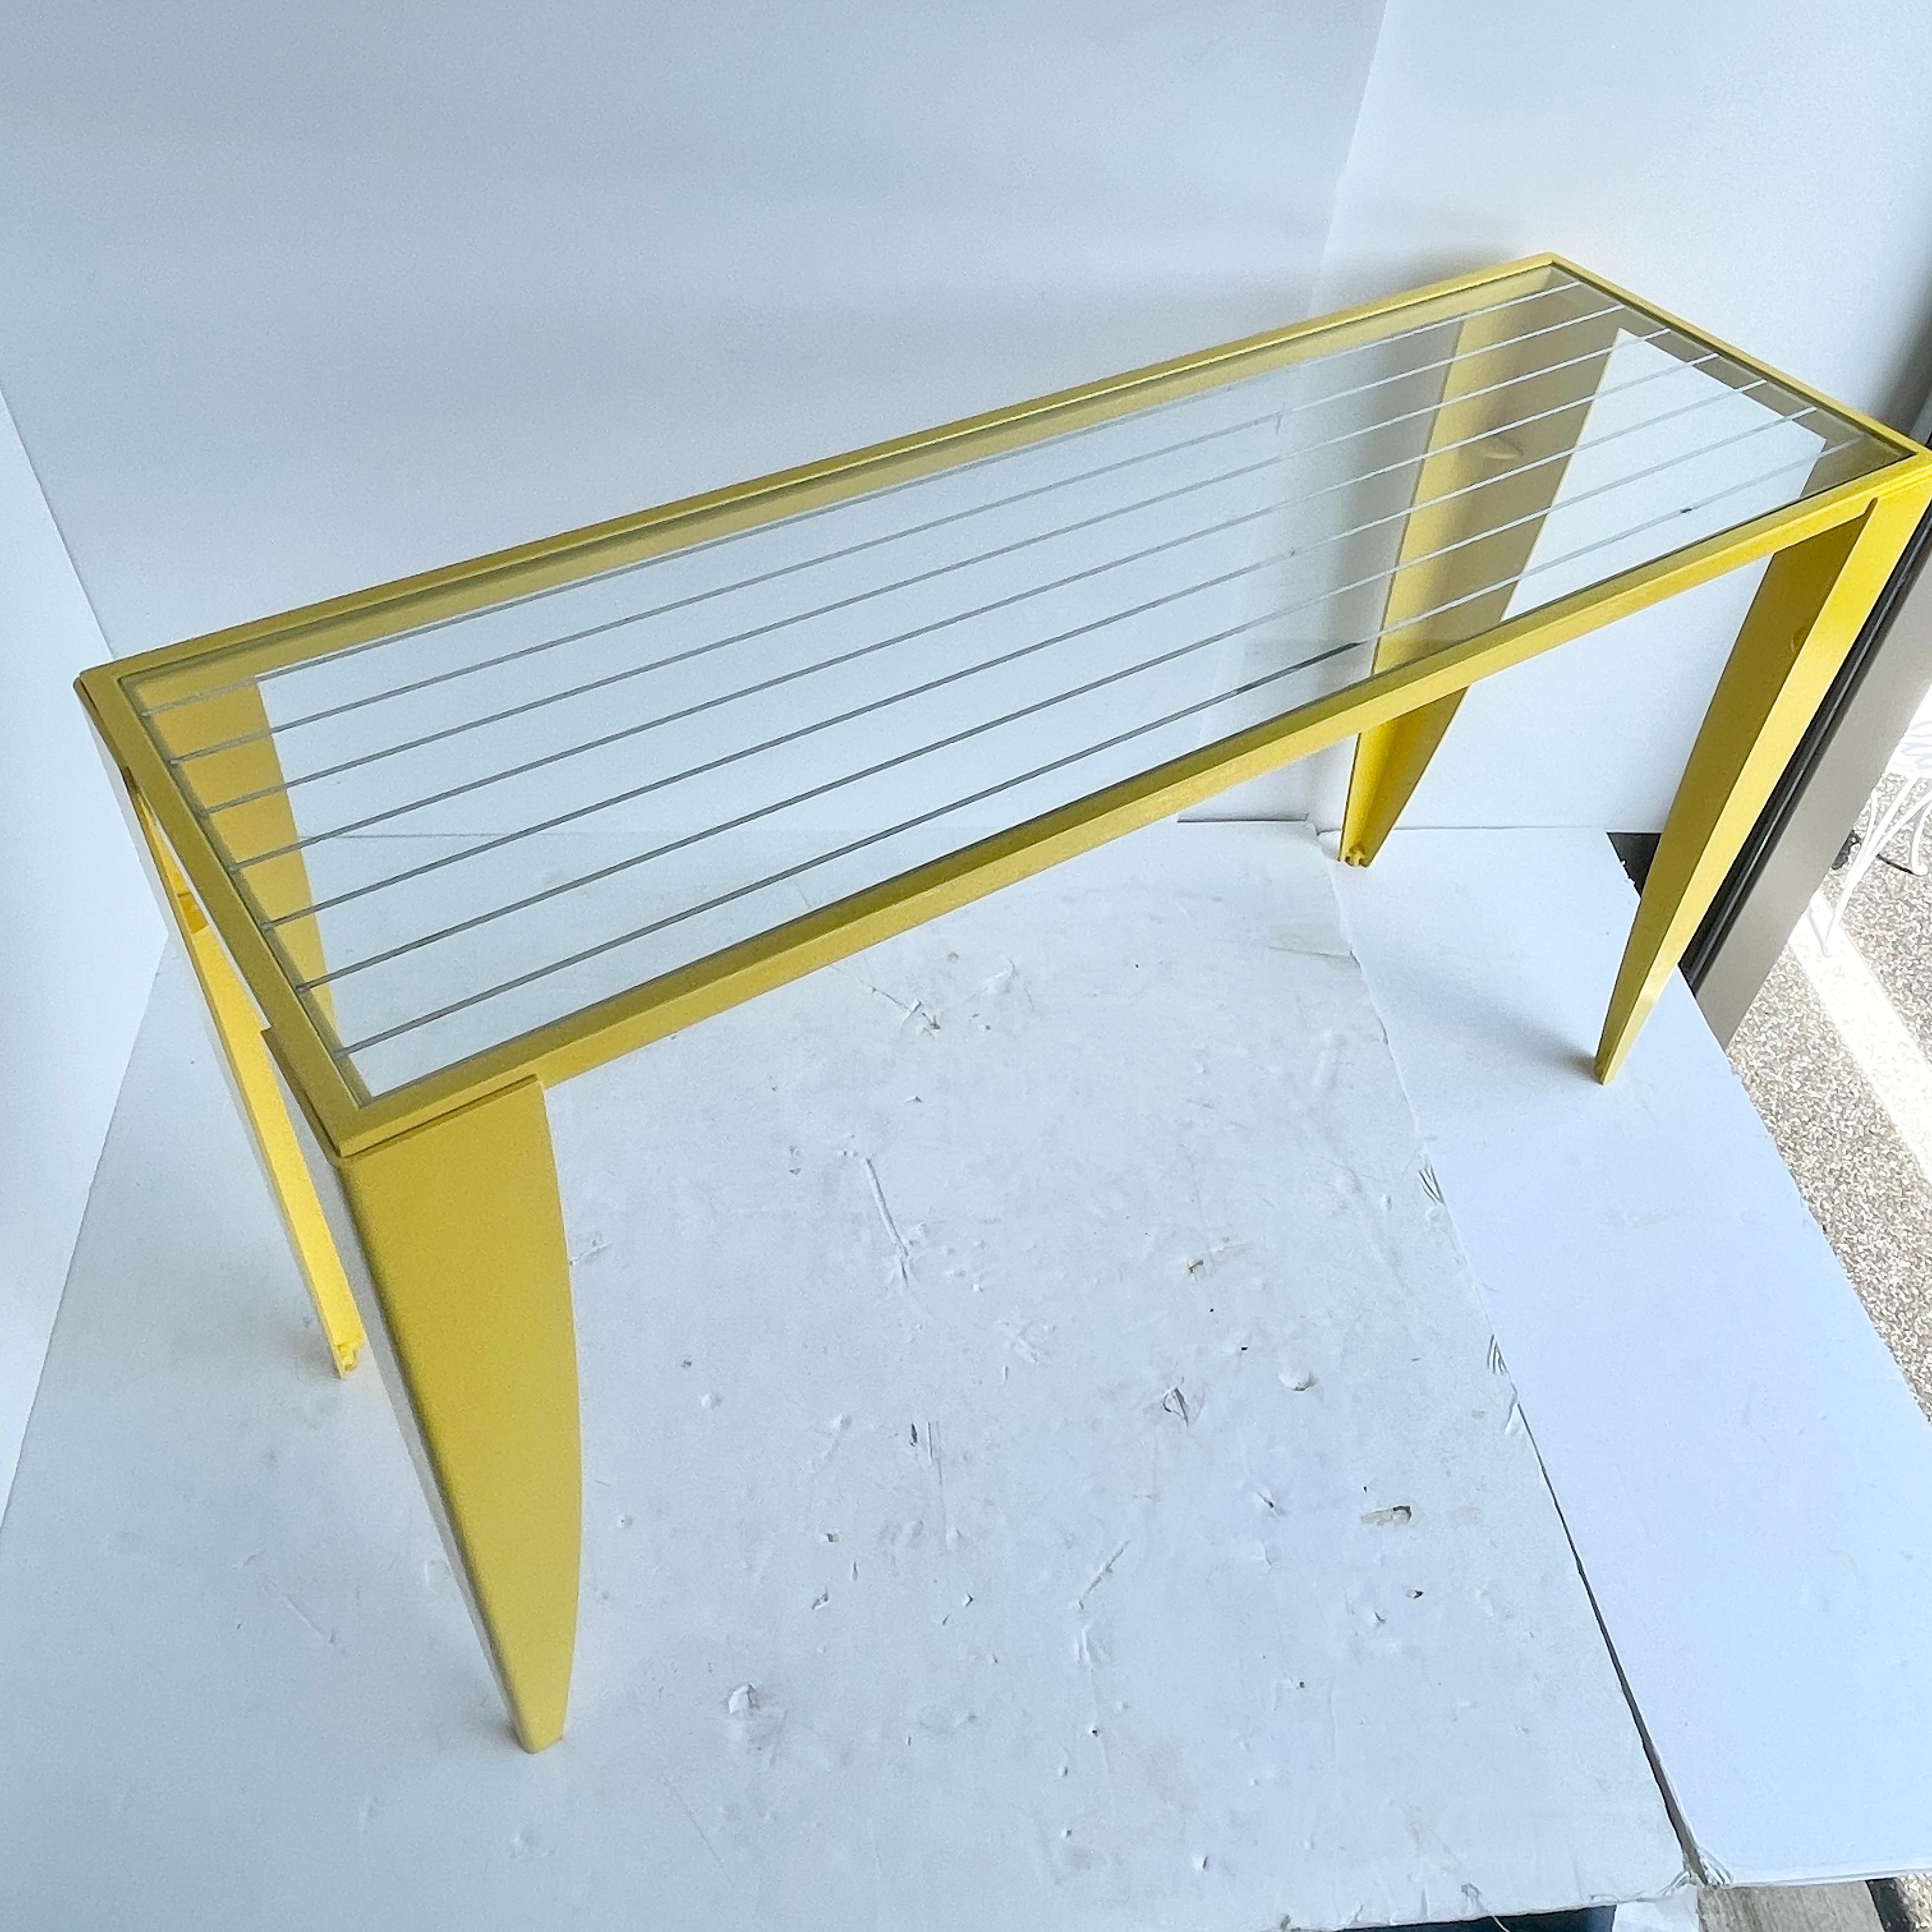 Stainless Steel Italian Console Table with Glass Top, Powder Coated Yellow, Mid-Century Modern